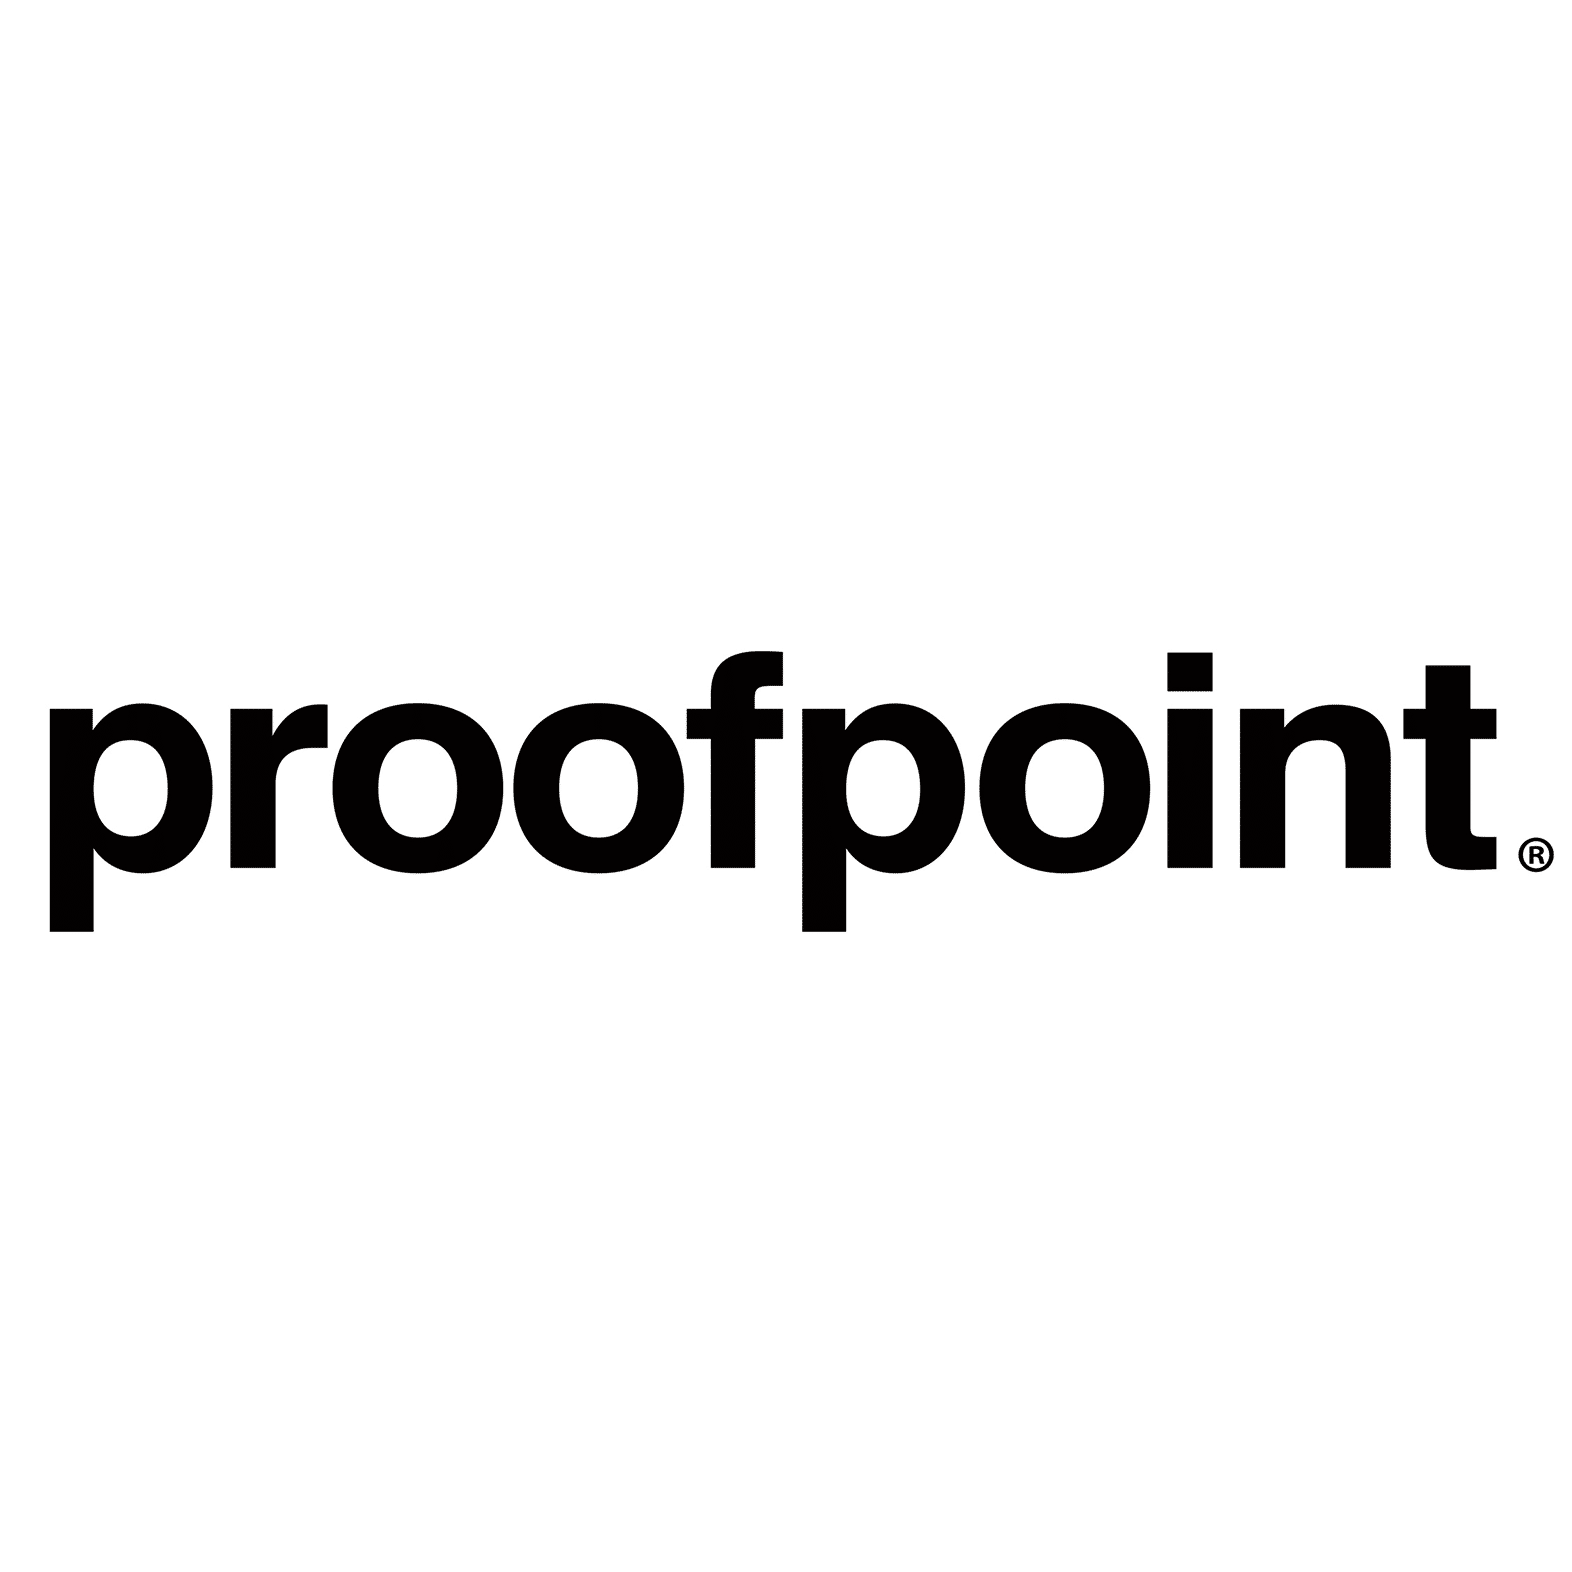 Proofpoint logo a vendor of zirous managed services